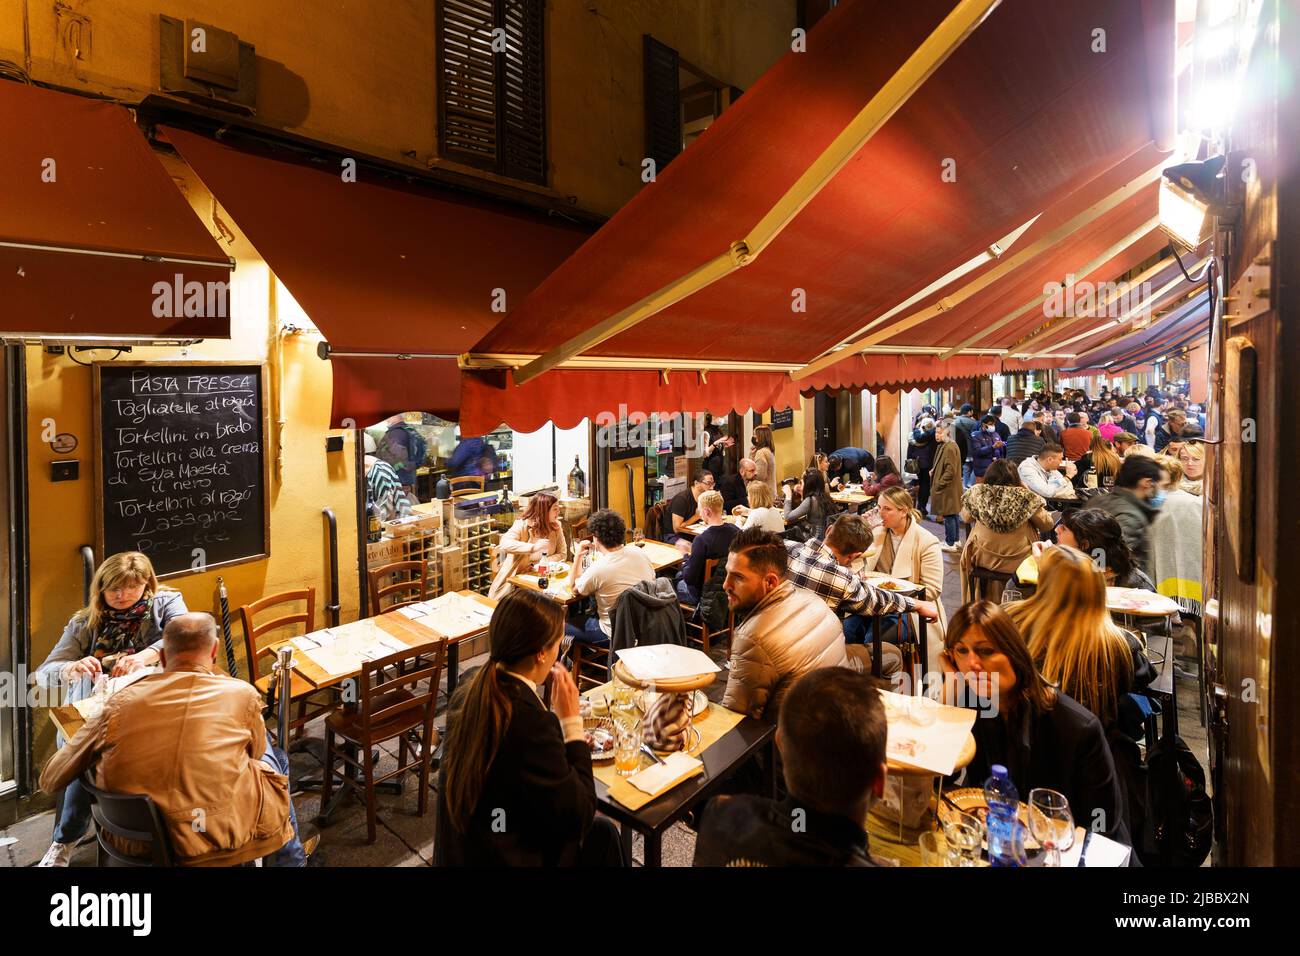 Bologna, Italy - October 29 2021: People enjoy food and drinks in the famous Pescherie Vecchie street lined with authentic bar and restaurants in Bolo Stock Photo